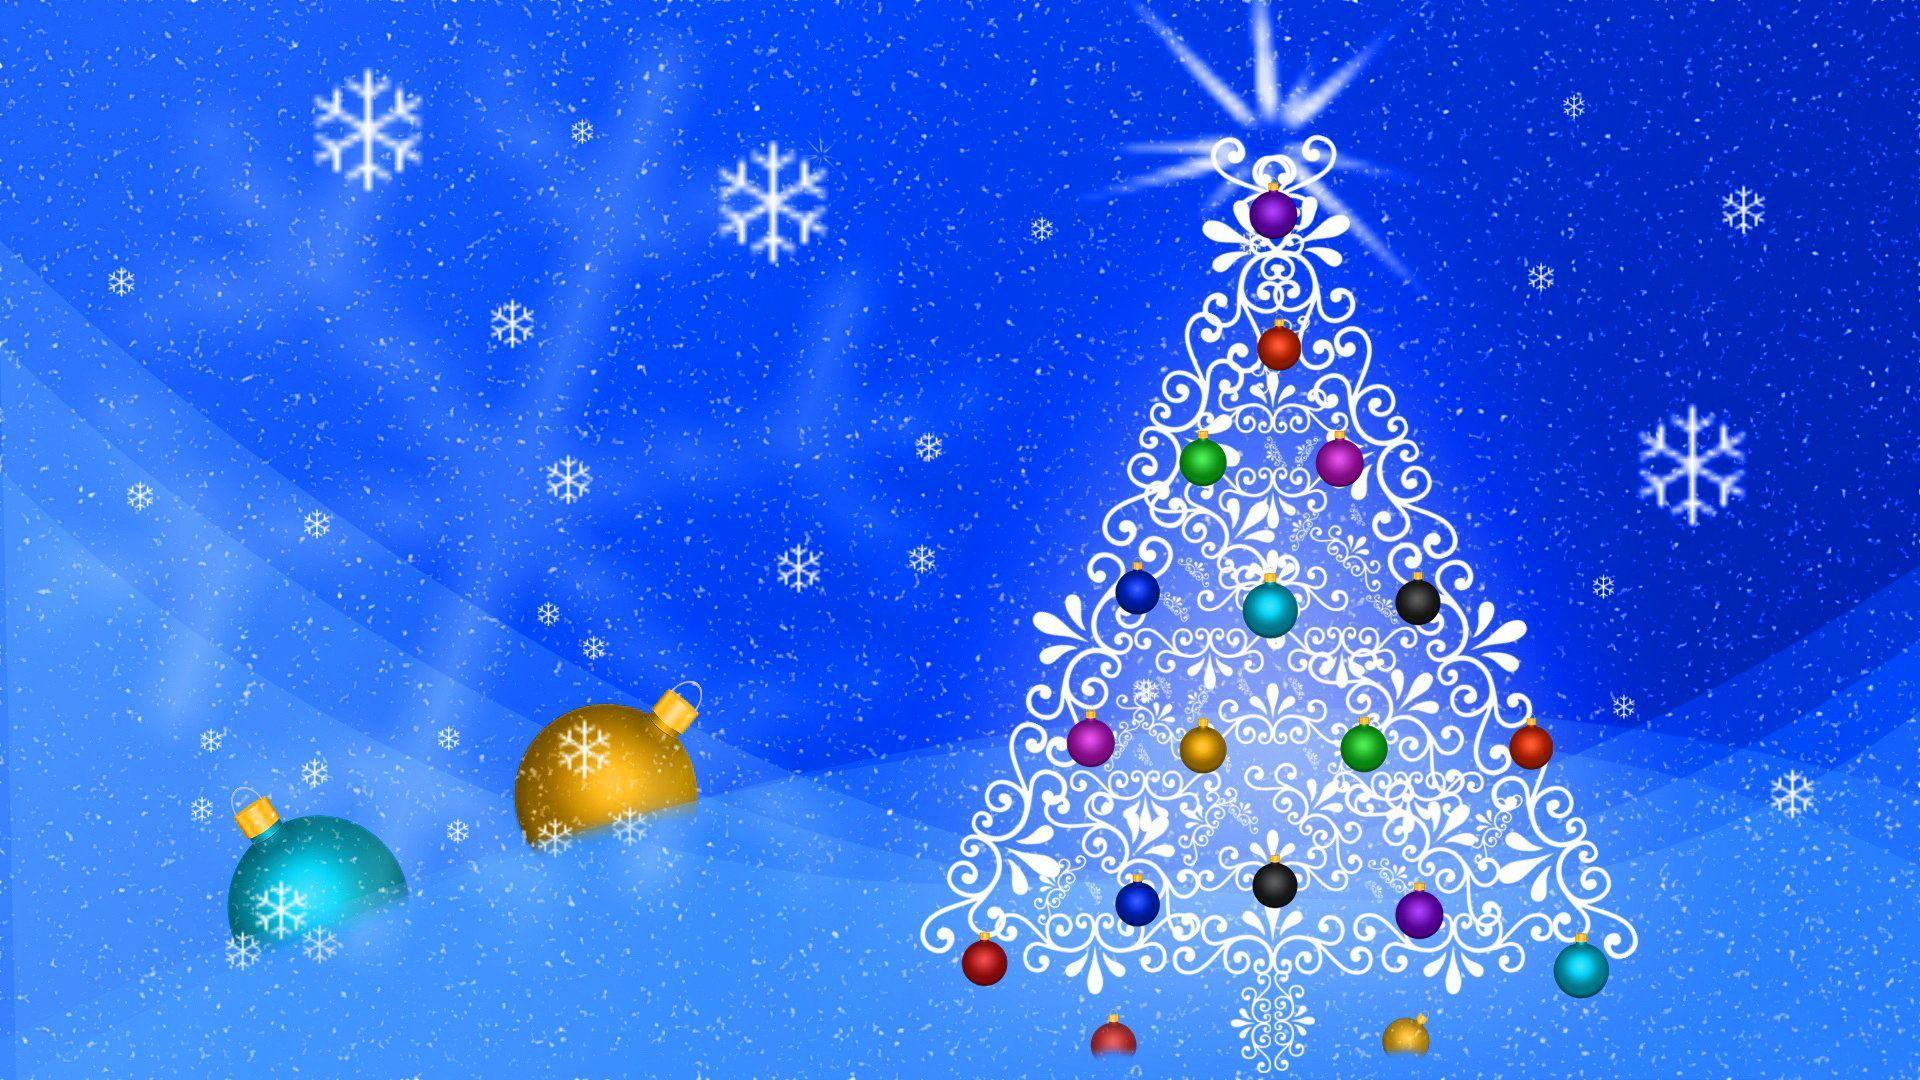 Abstract Christmas Tree Wallpapers - Top Free Abstract Christmas Tree ...